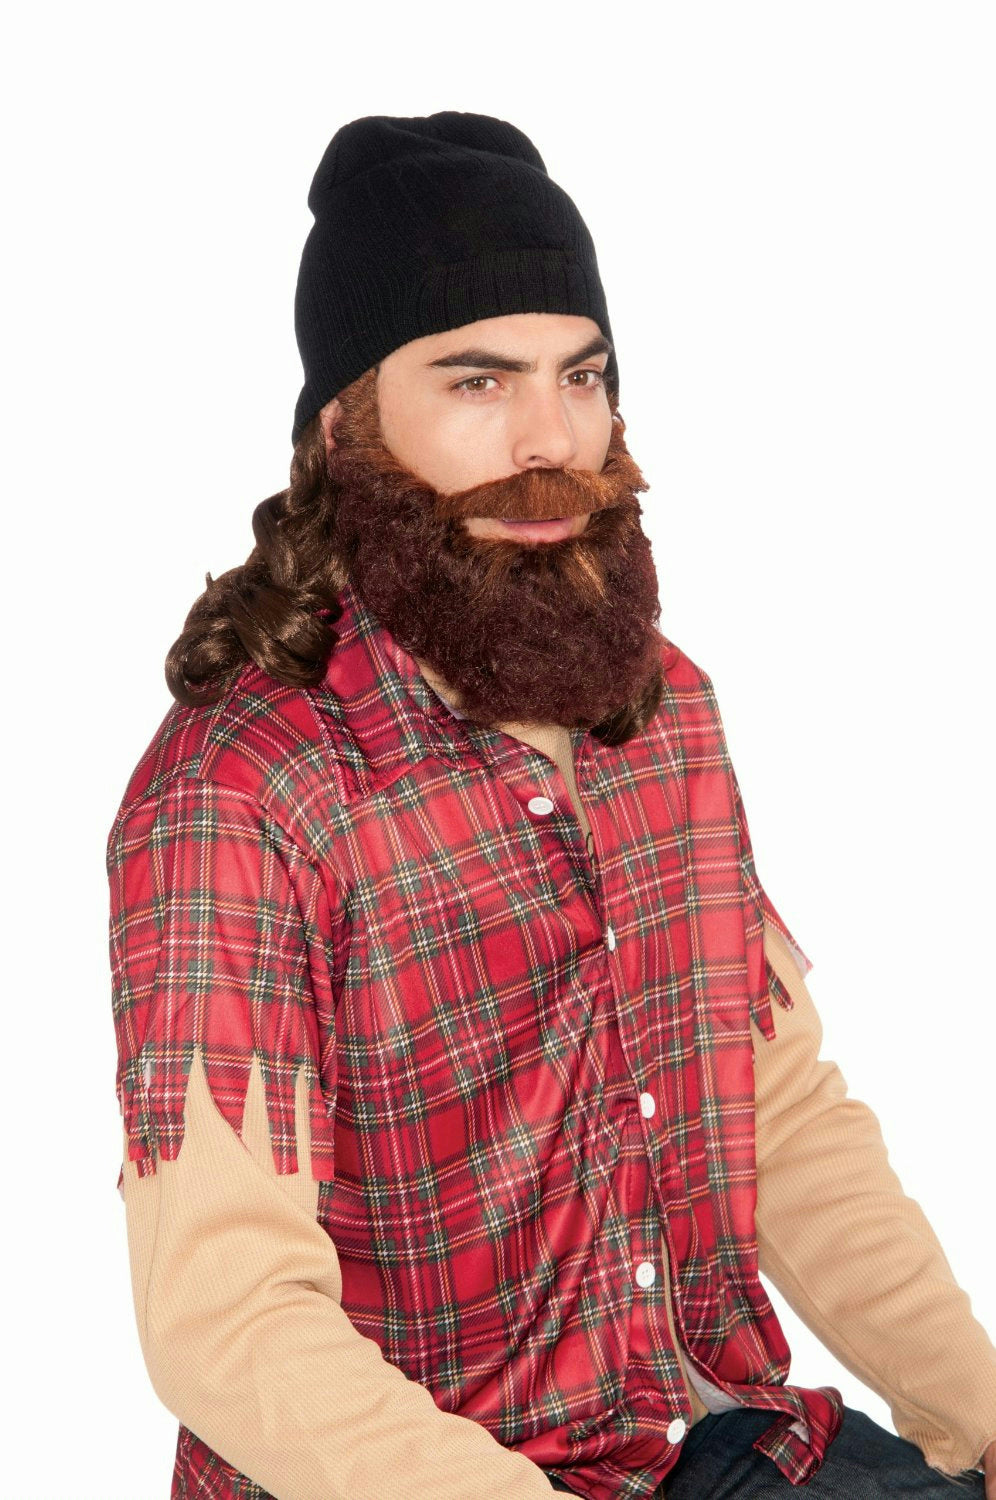 Duck Hunter Man Black Skull Cap with Attached Brown Wig and Beard